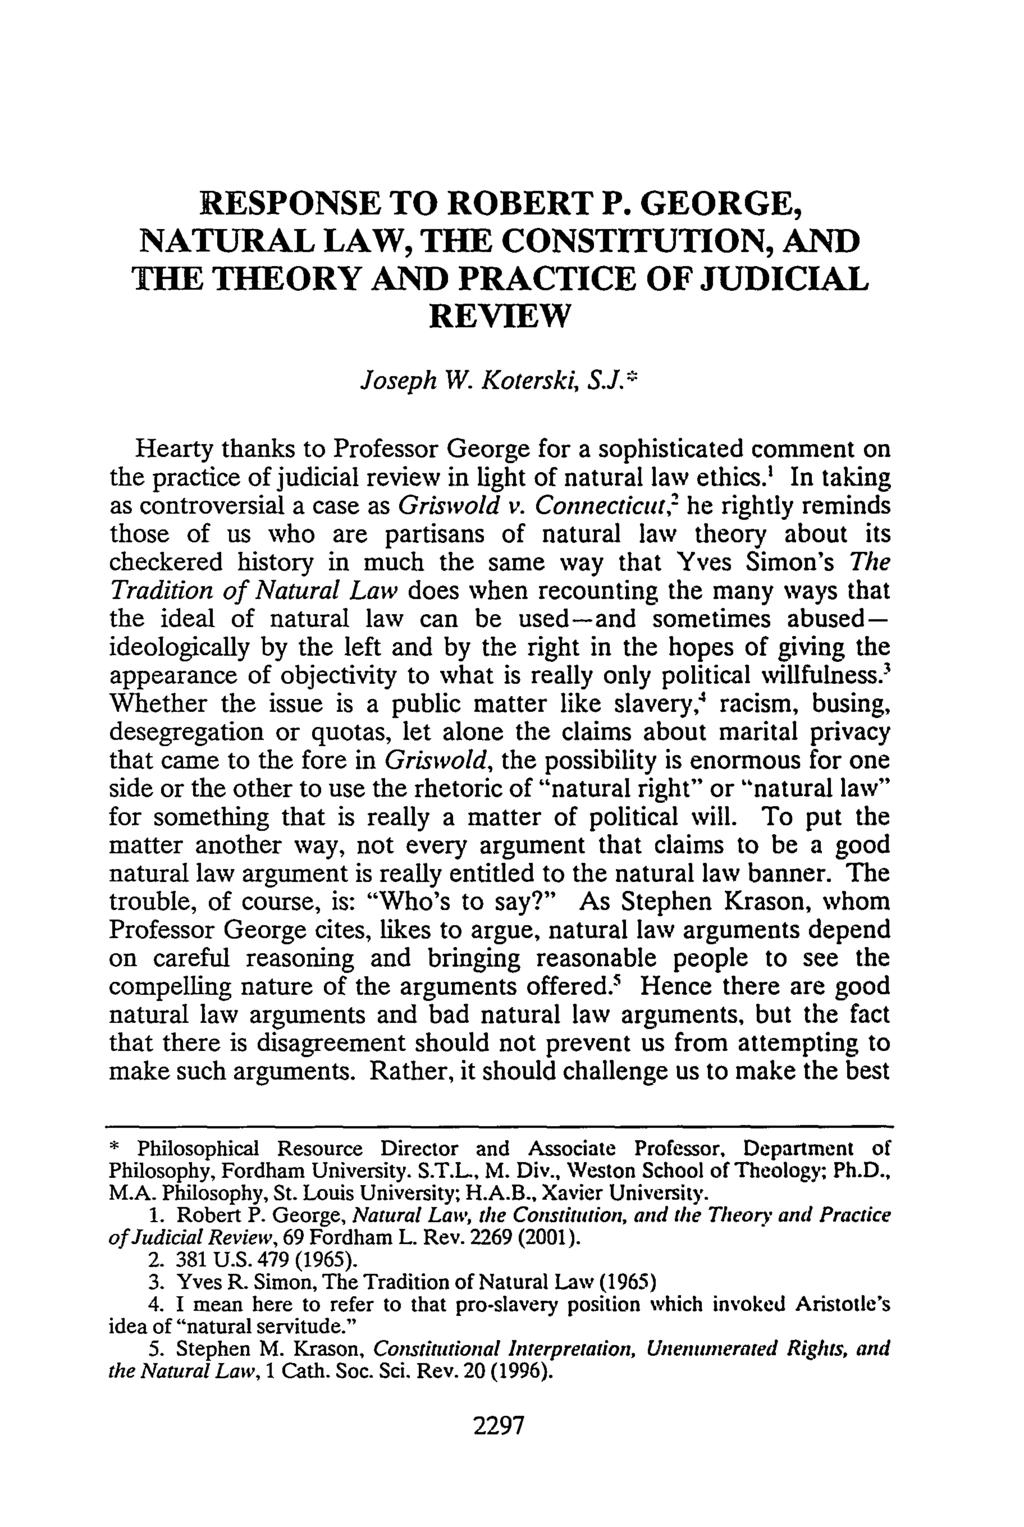 RESPONSE TO ROBERT P. GEORGE, NATURAL LAW, THE CONSTITUTION, AND THE THEORY AND PRACTICE OF JU